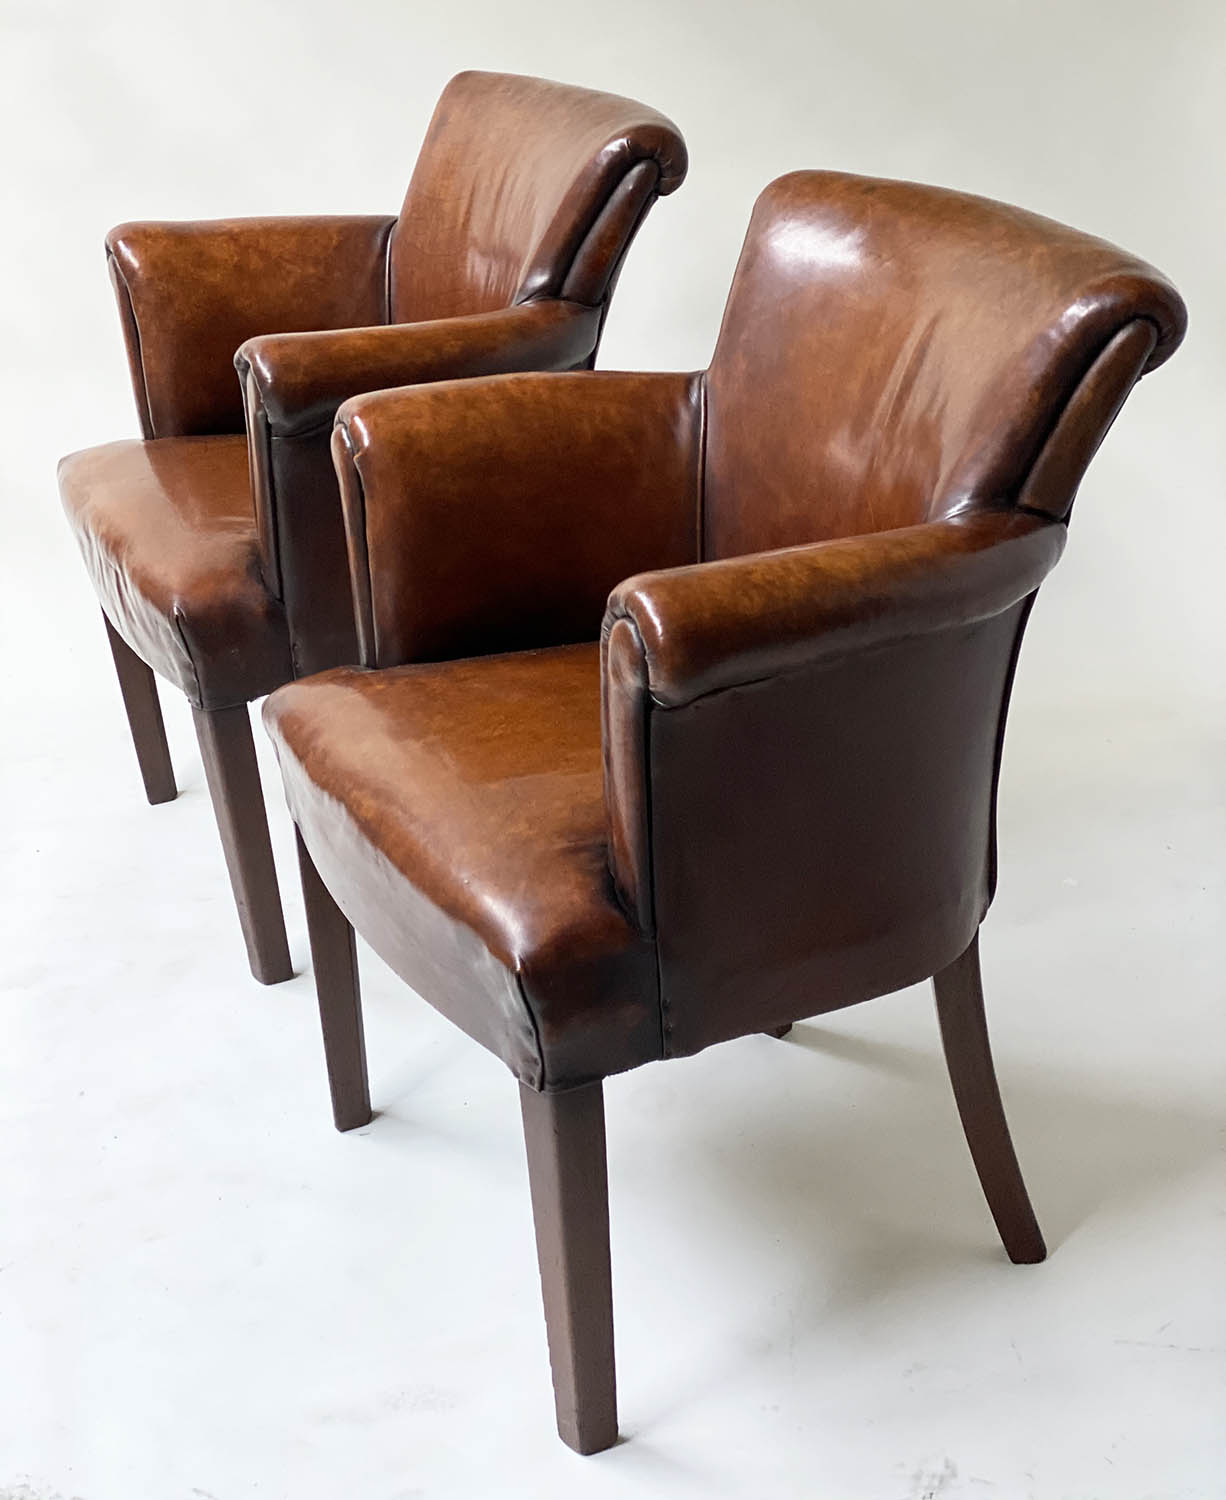 TUB ARMCHAIRS, a pair, vintage hand dyed tobacco brown leather, with arched rounded backs and - Image 3 of 7